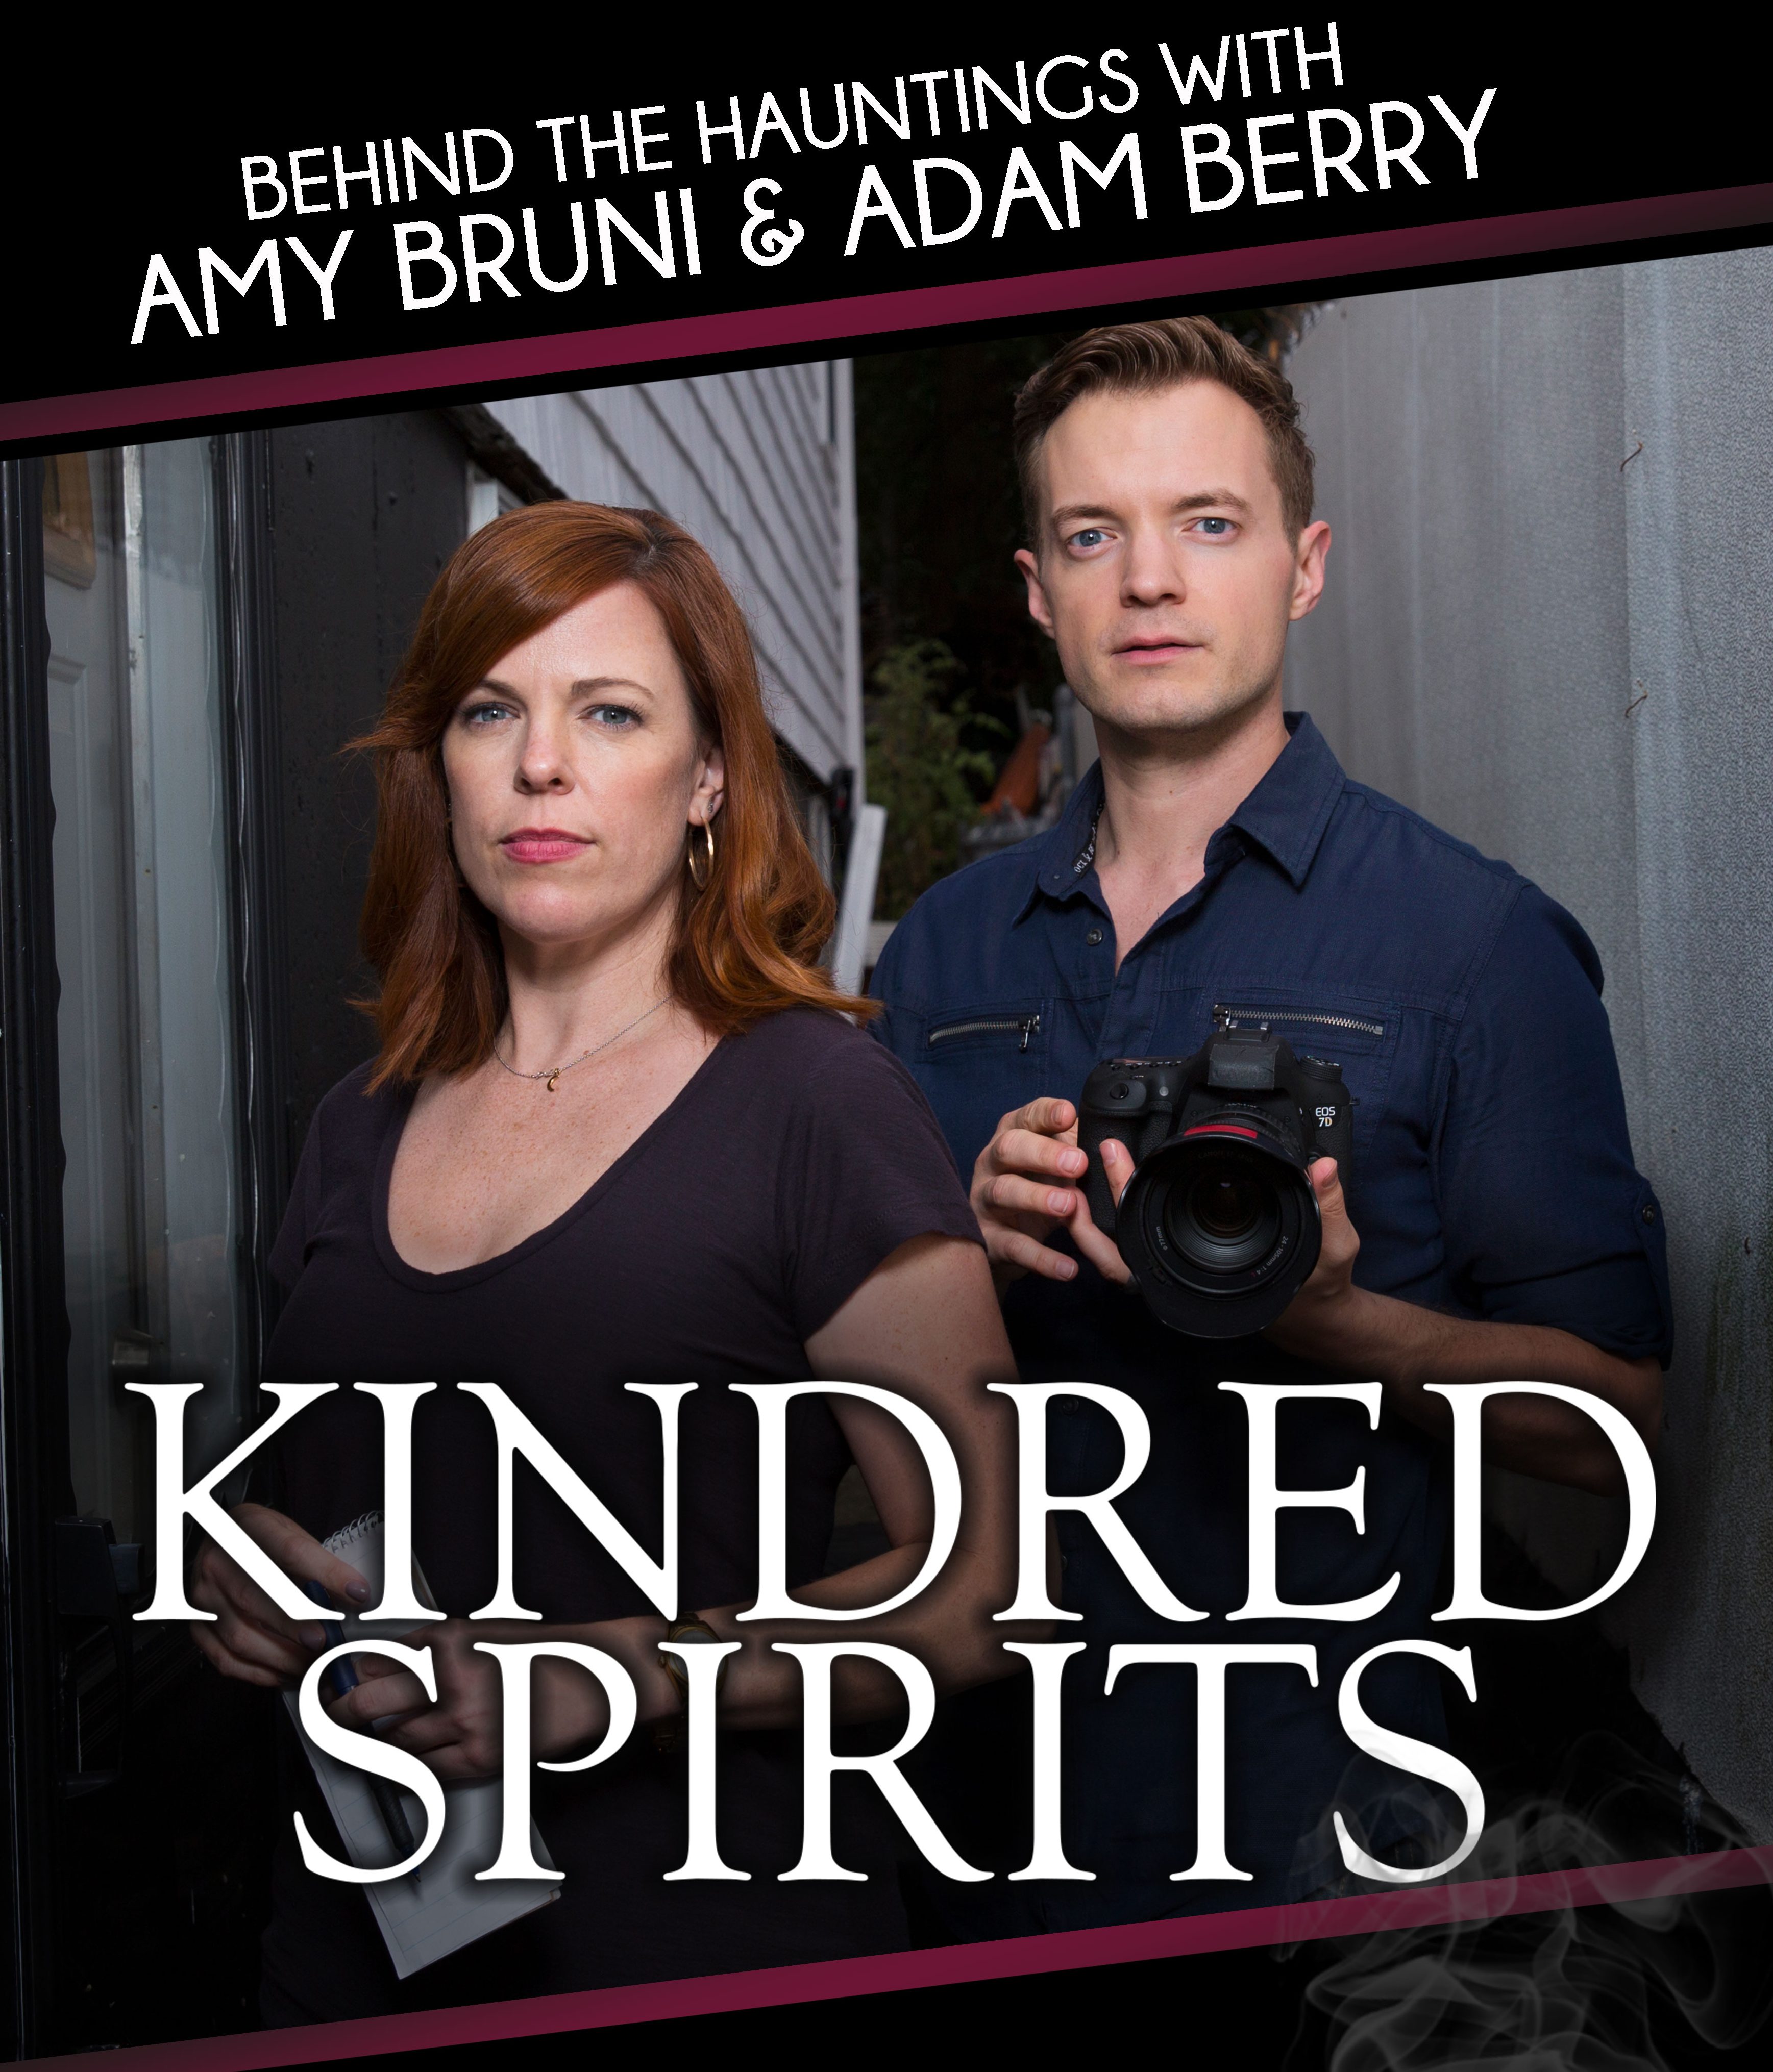 Kindred Spirits: Behind the Hauntings with Amy Bruni & Adam Berry.